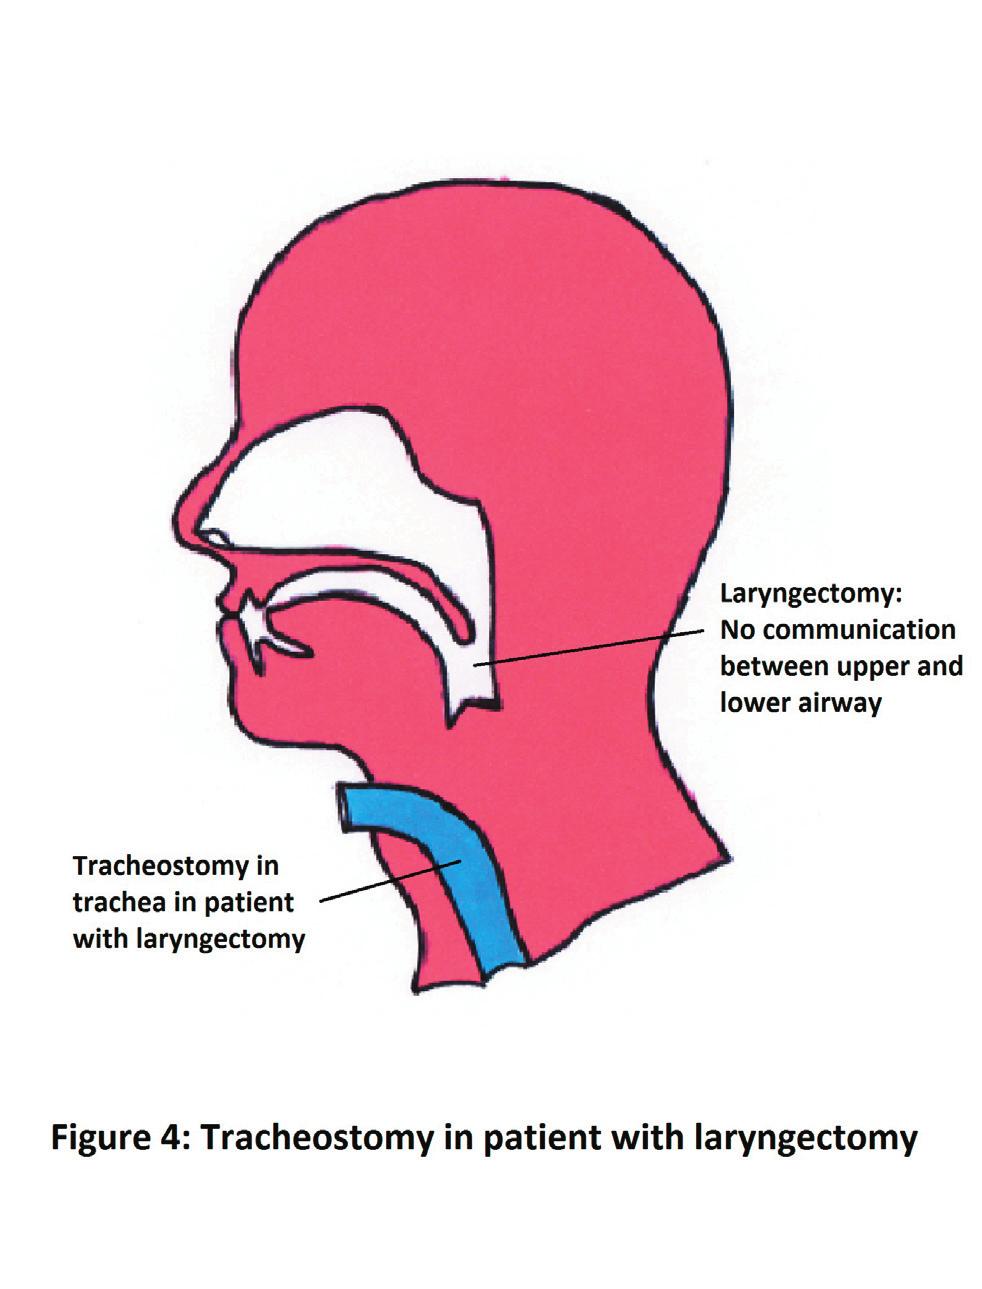 It is important to note that if the tracheostomy is occluded the patient cannot breathe unless the cuff is deflated and air-flow around the tube is permitted.